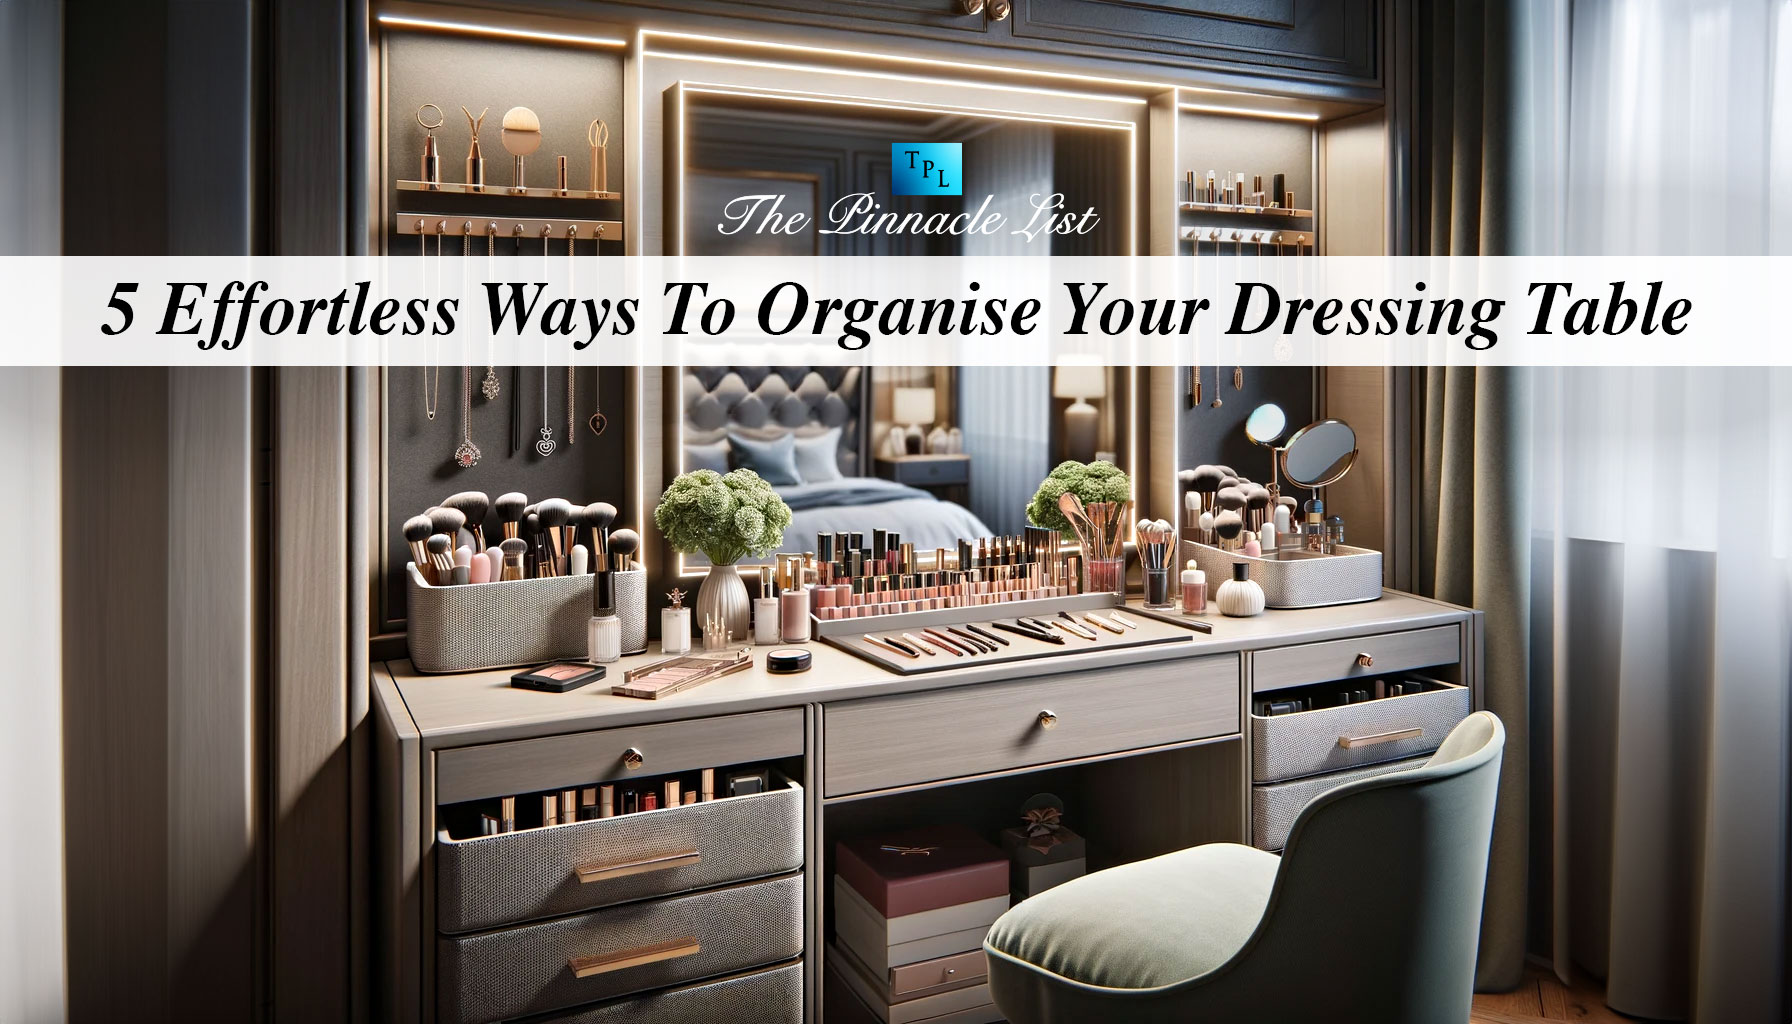 5 Effortless Ways To Organise Your Dressing Table